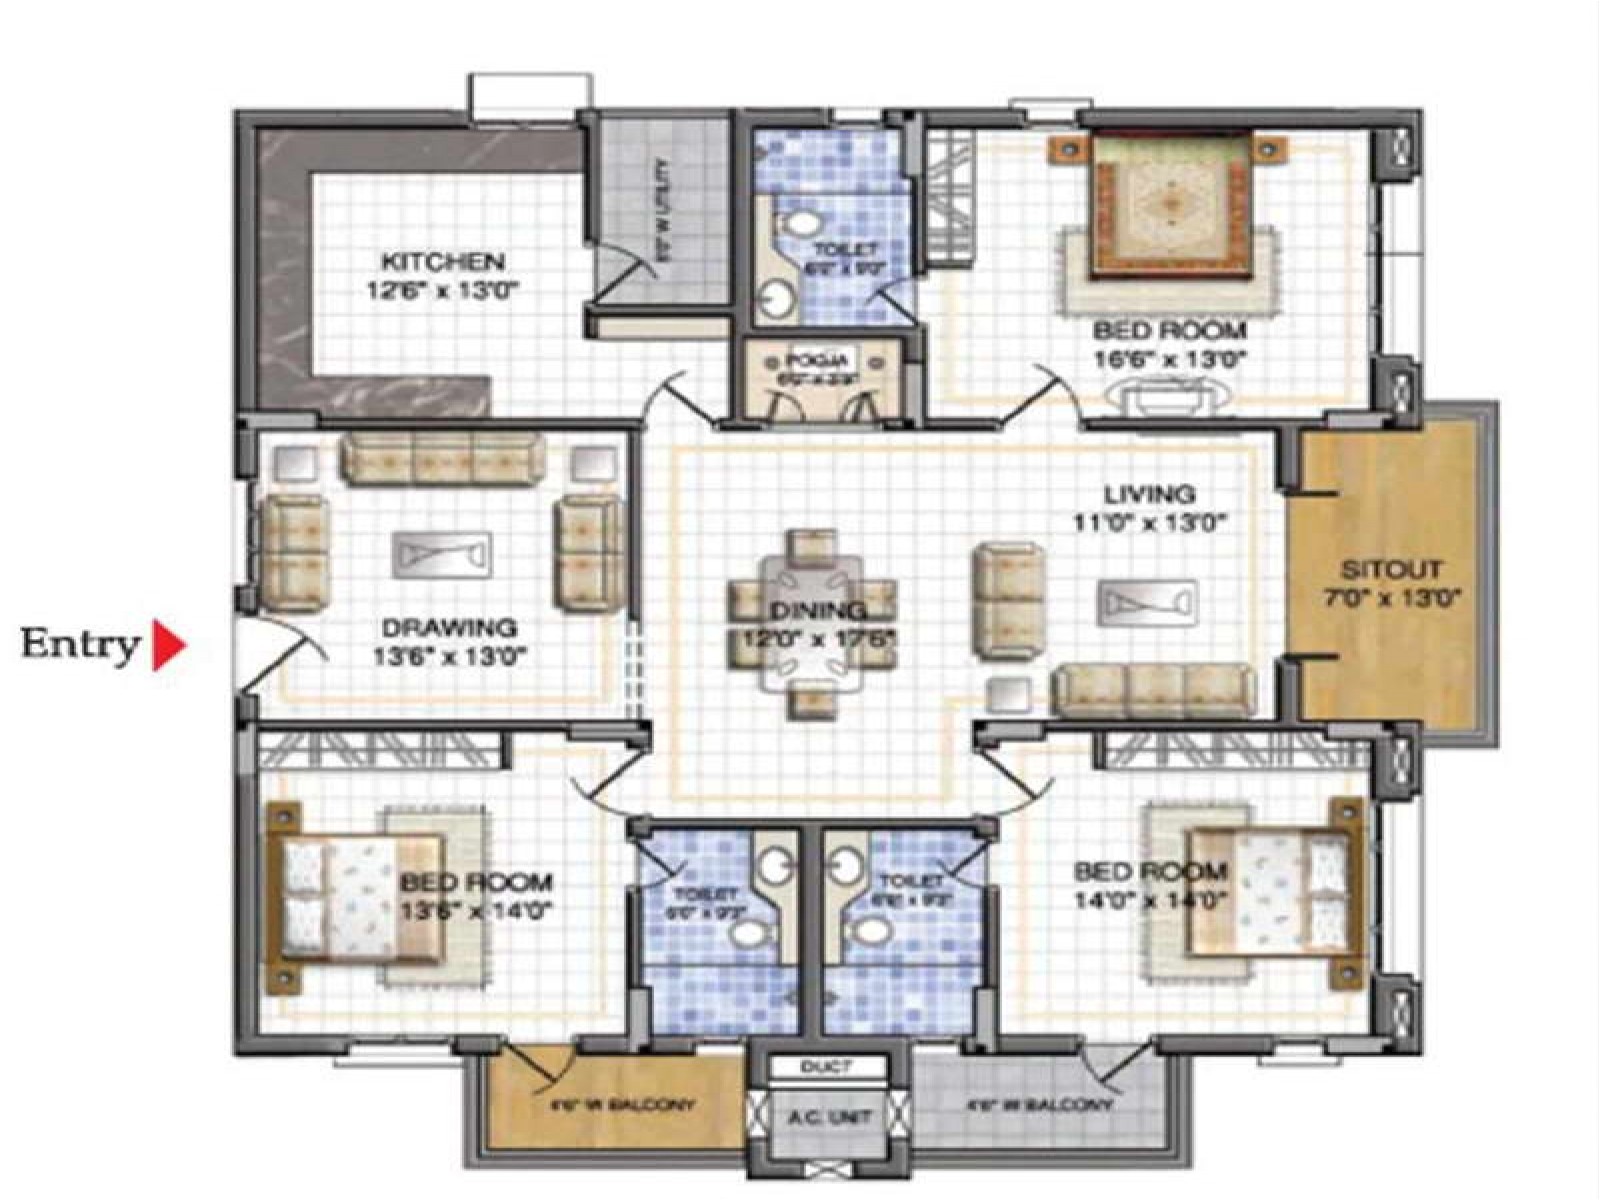 the advantages we can get from having free floor plan design software